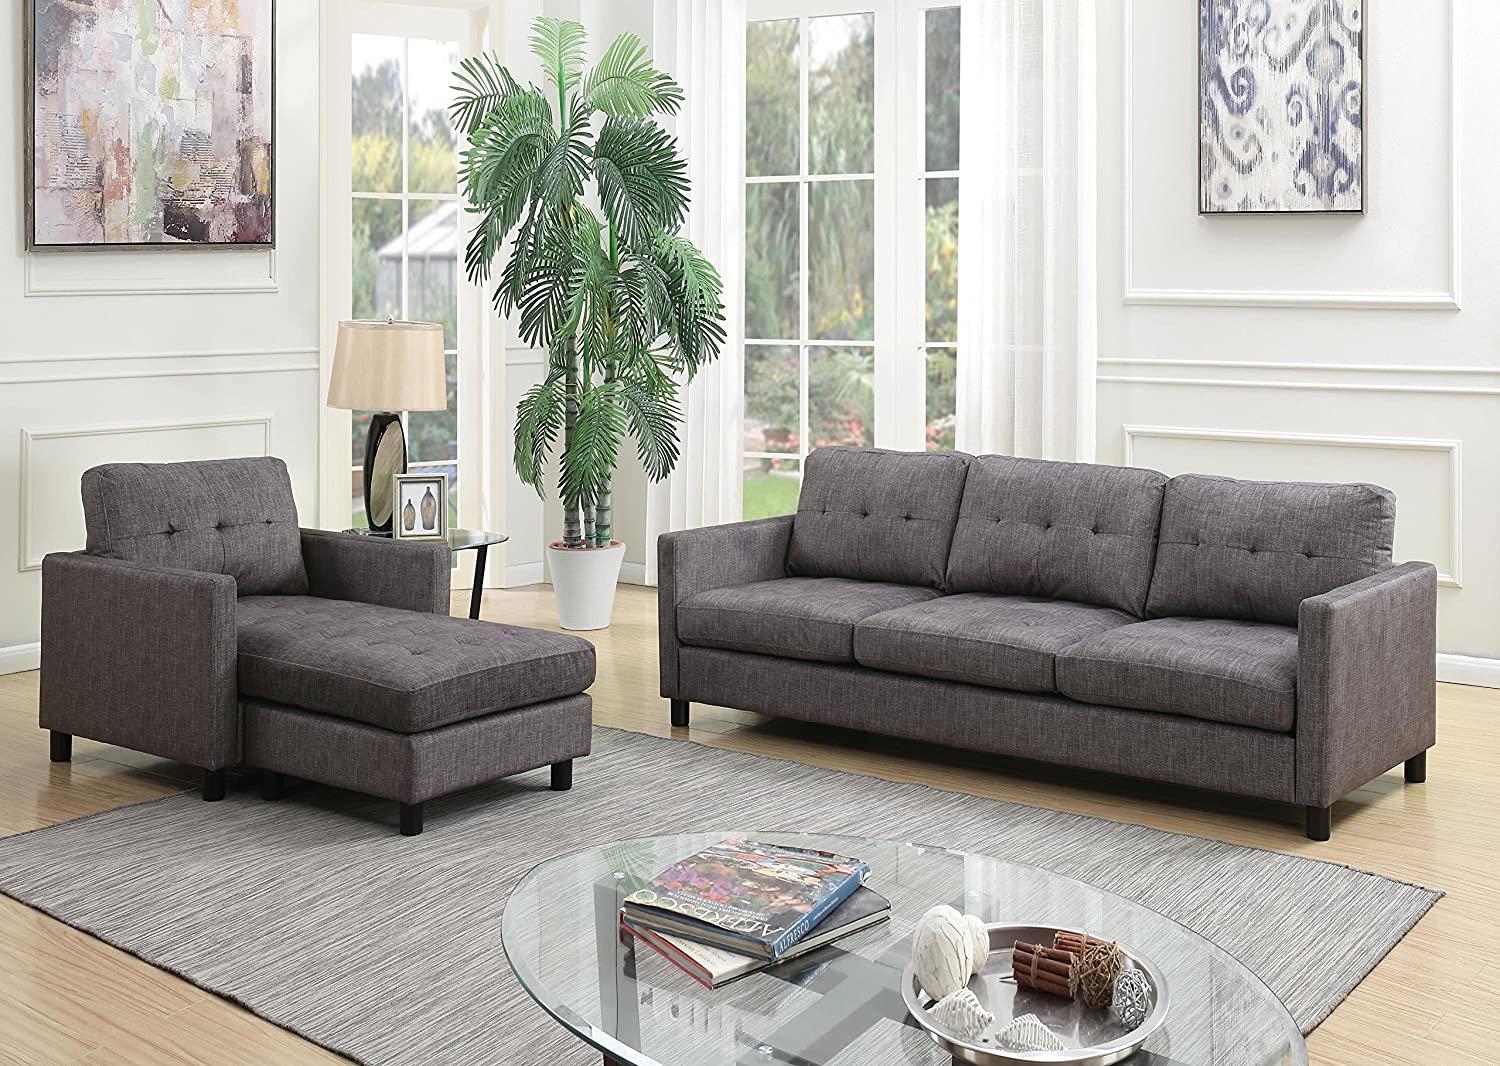 Modern Sectional Sofa Set Ceasar 53315-4pcs in Gray Fabric